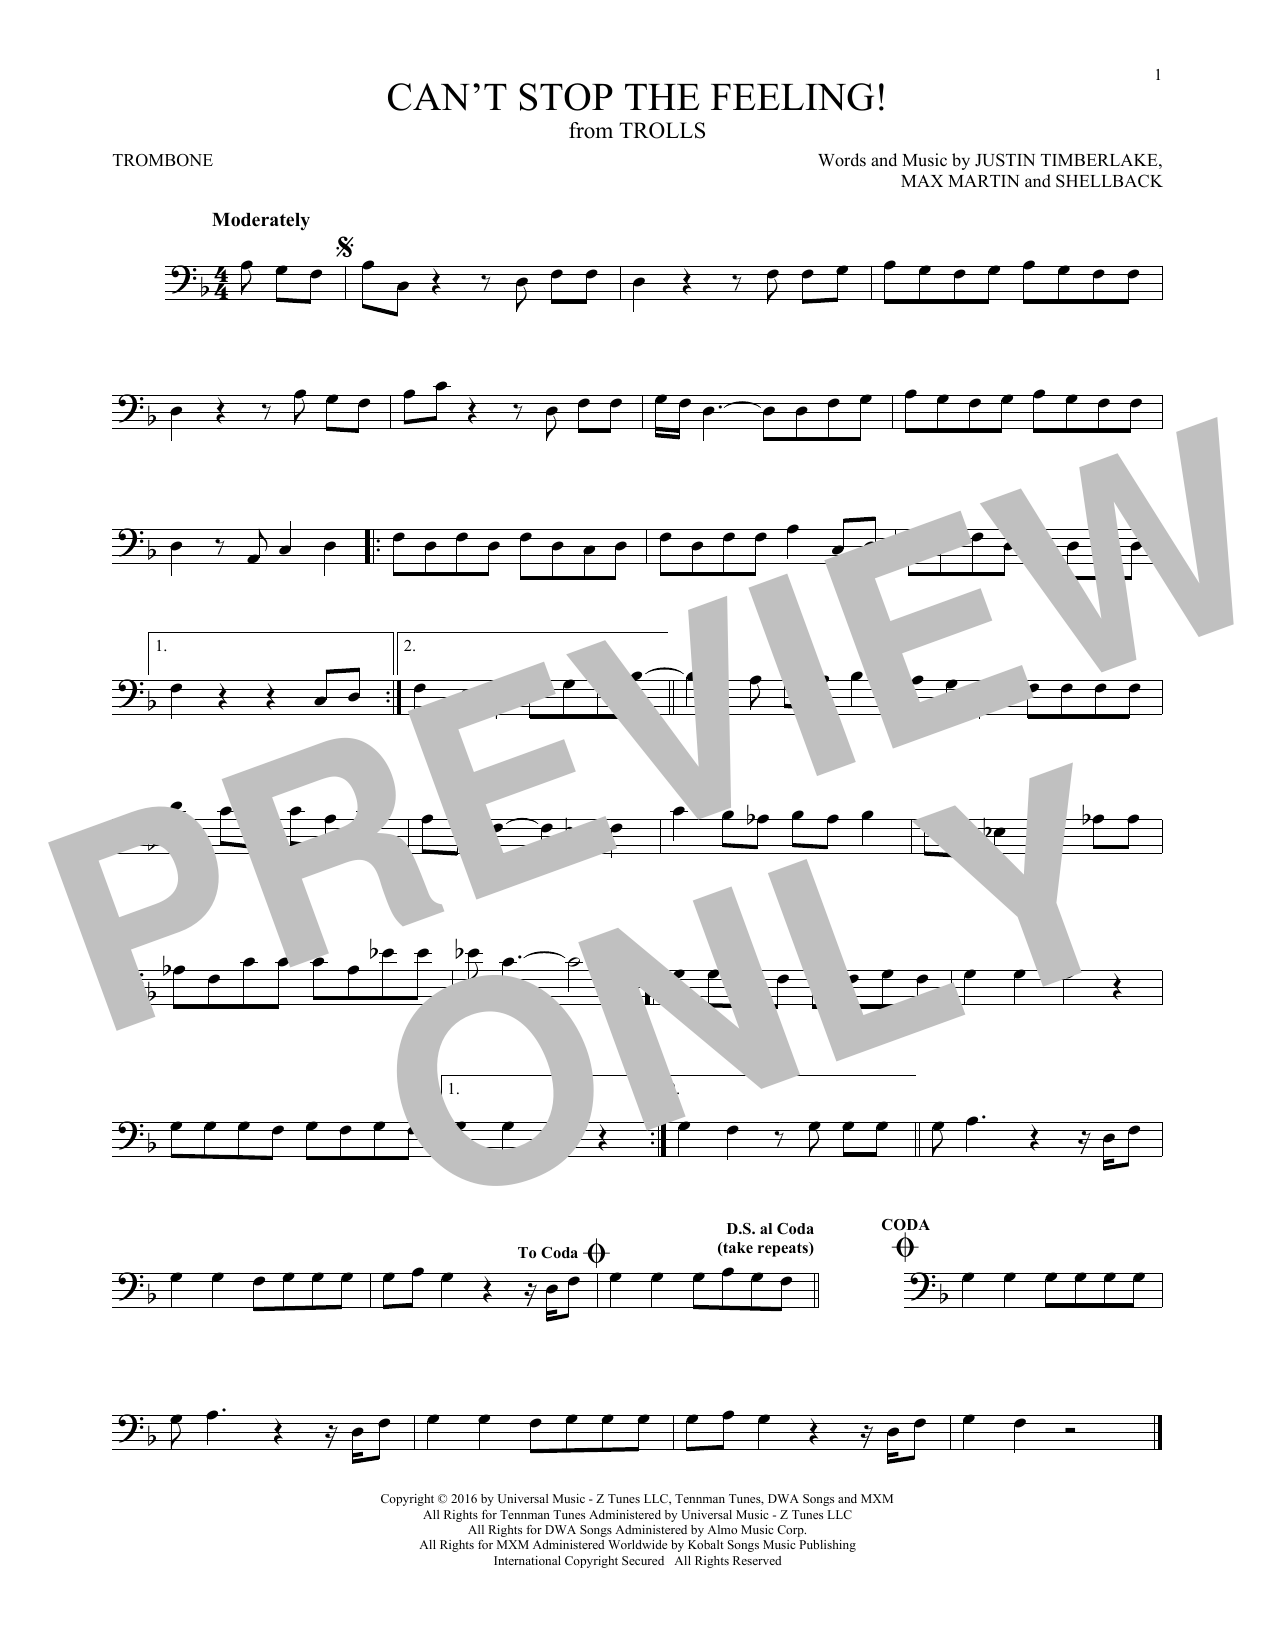 Download Justin Timberlake Can't Stop The Feeling! (from Trolls) Sheet Music